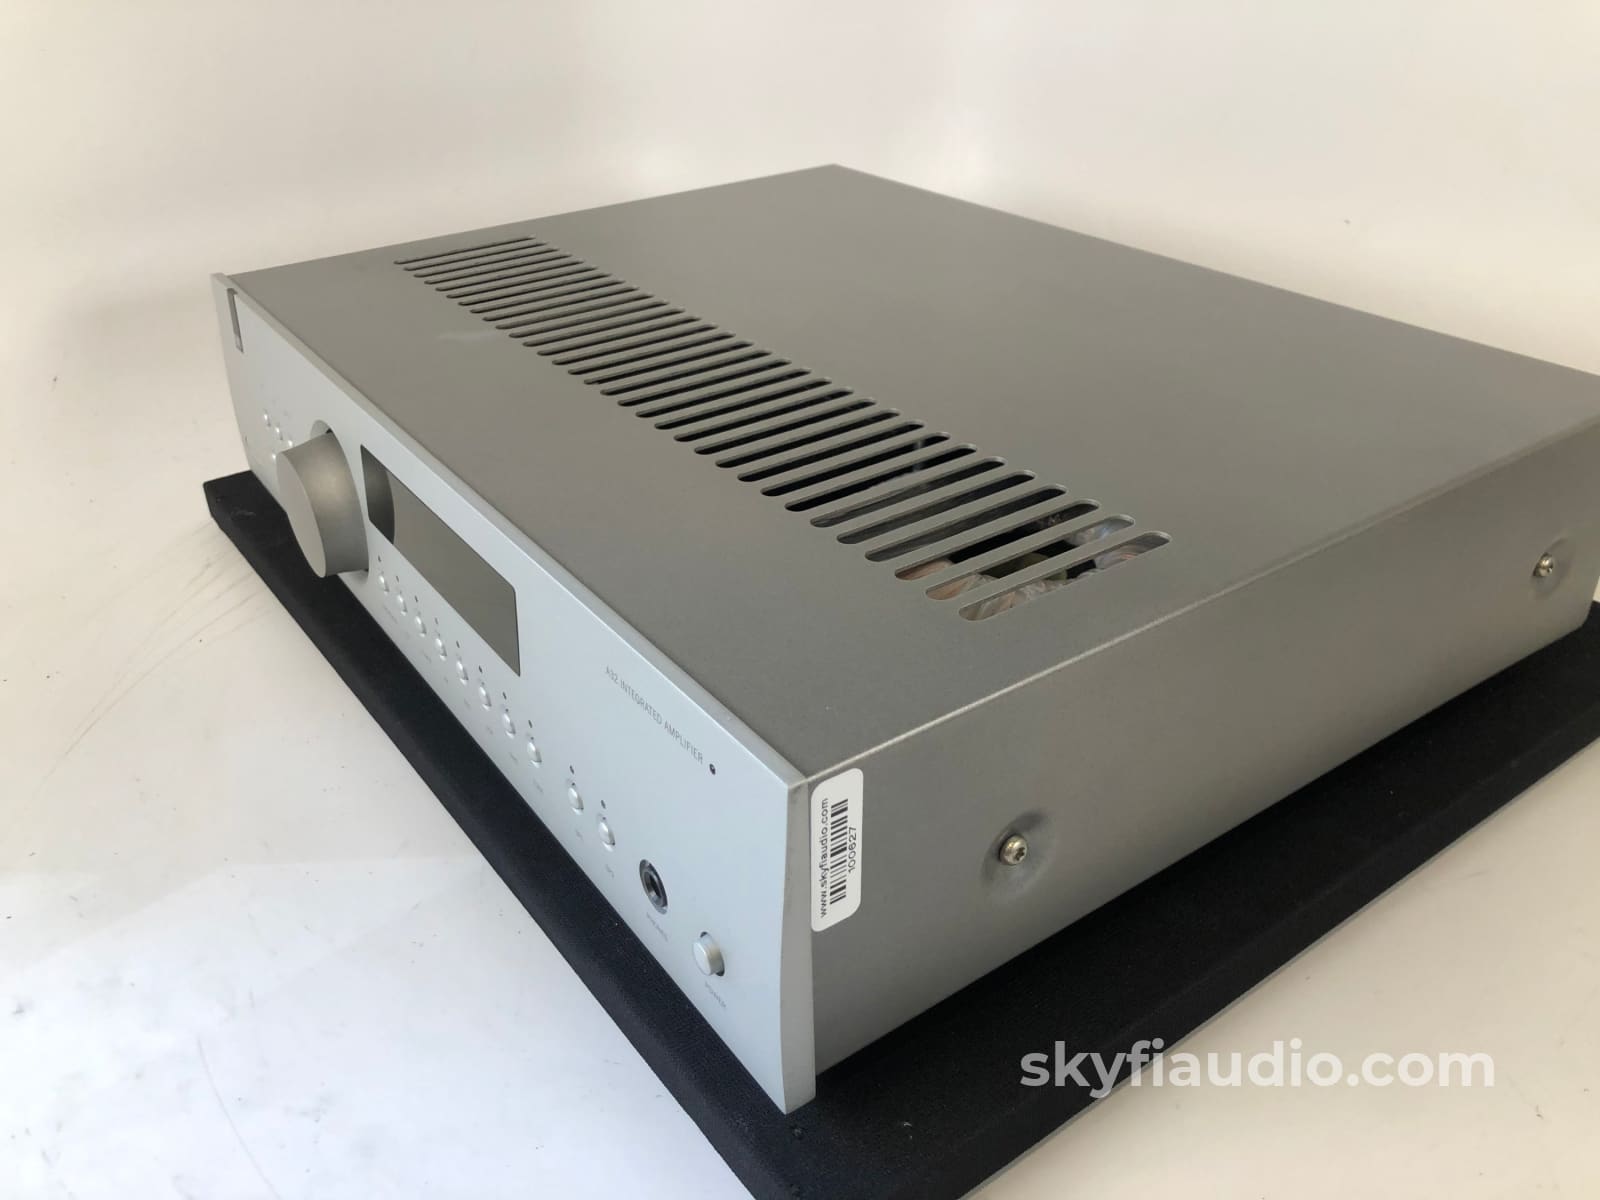 Arcam Fmj A32 Integrated Amplifier With Mm/Mc Phono